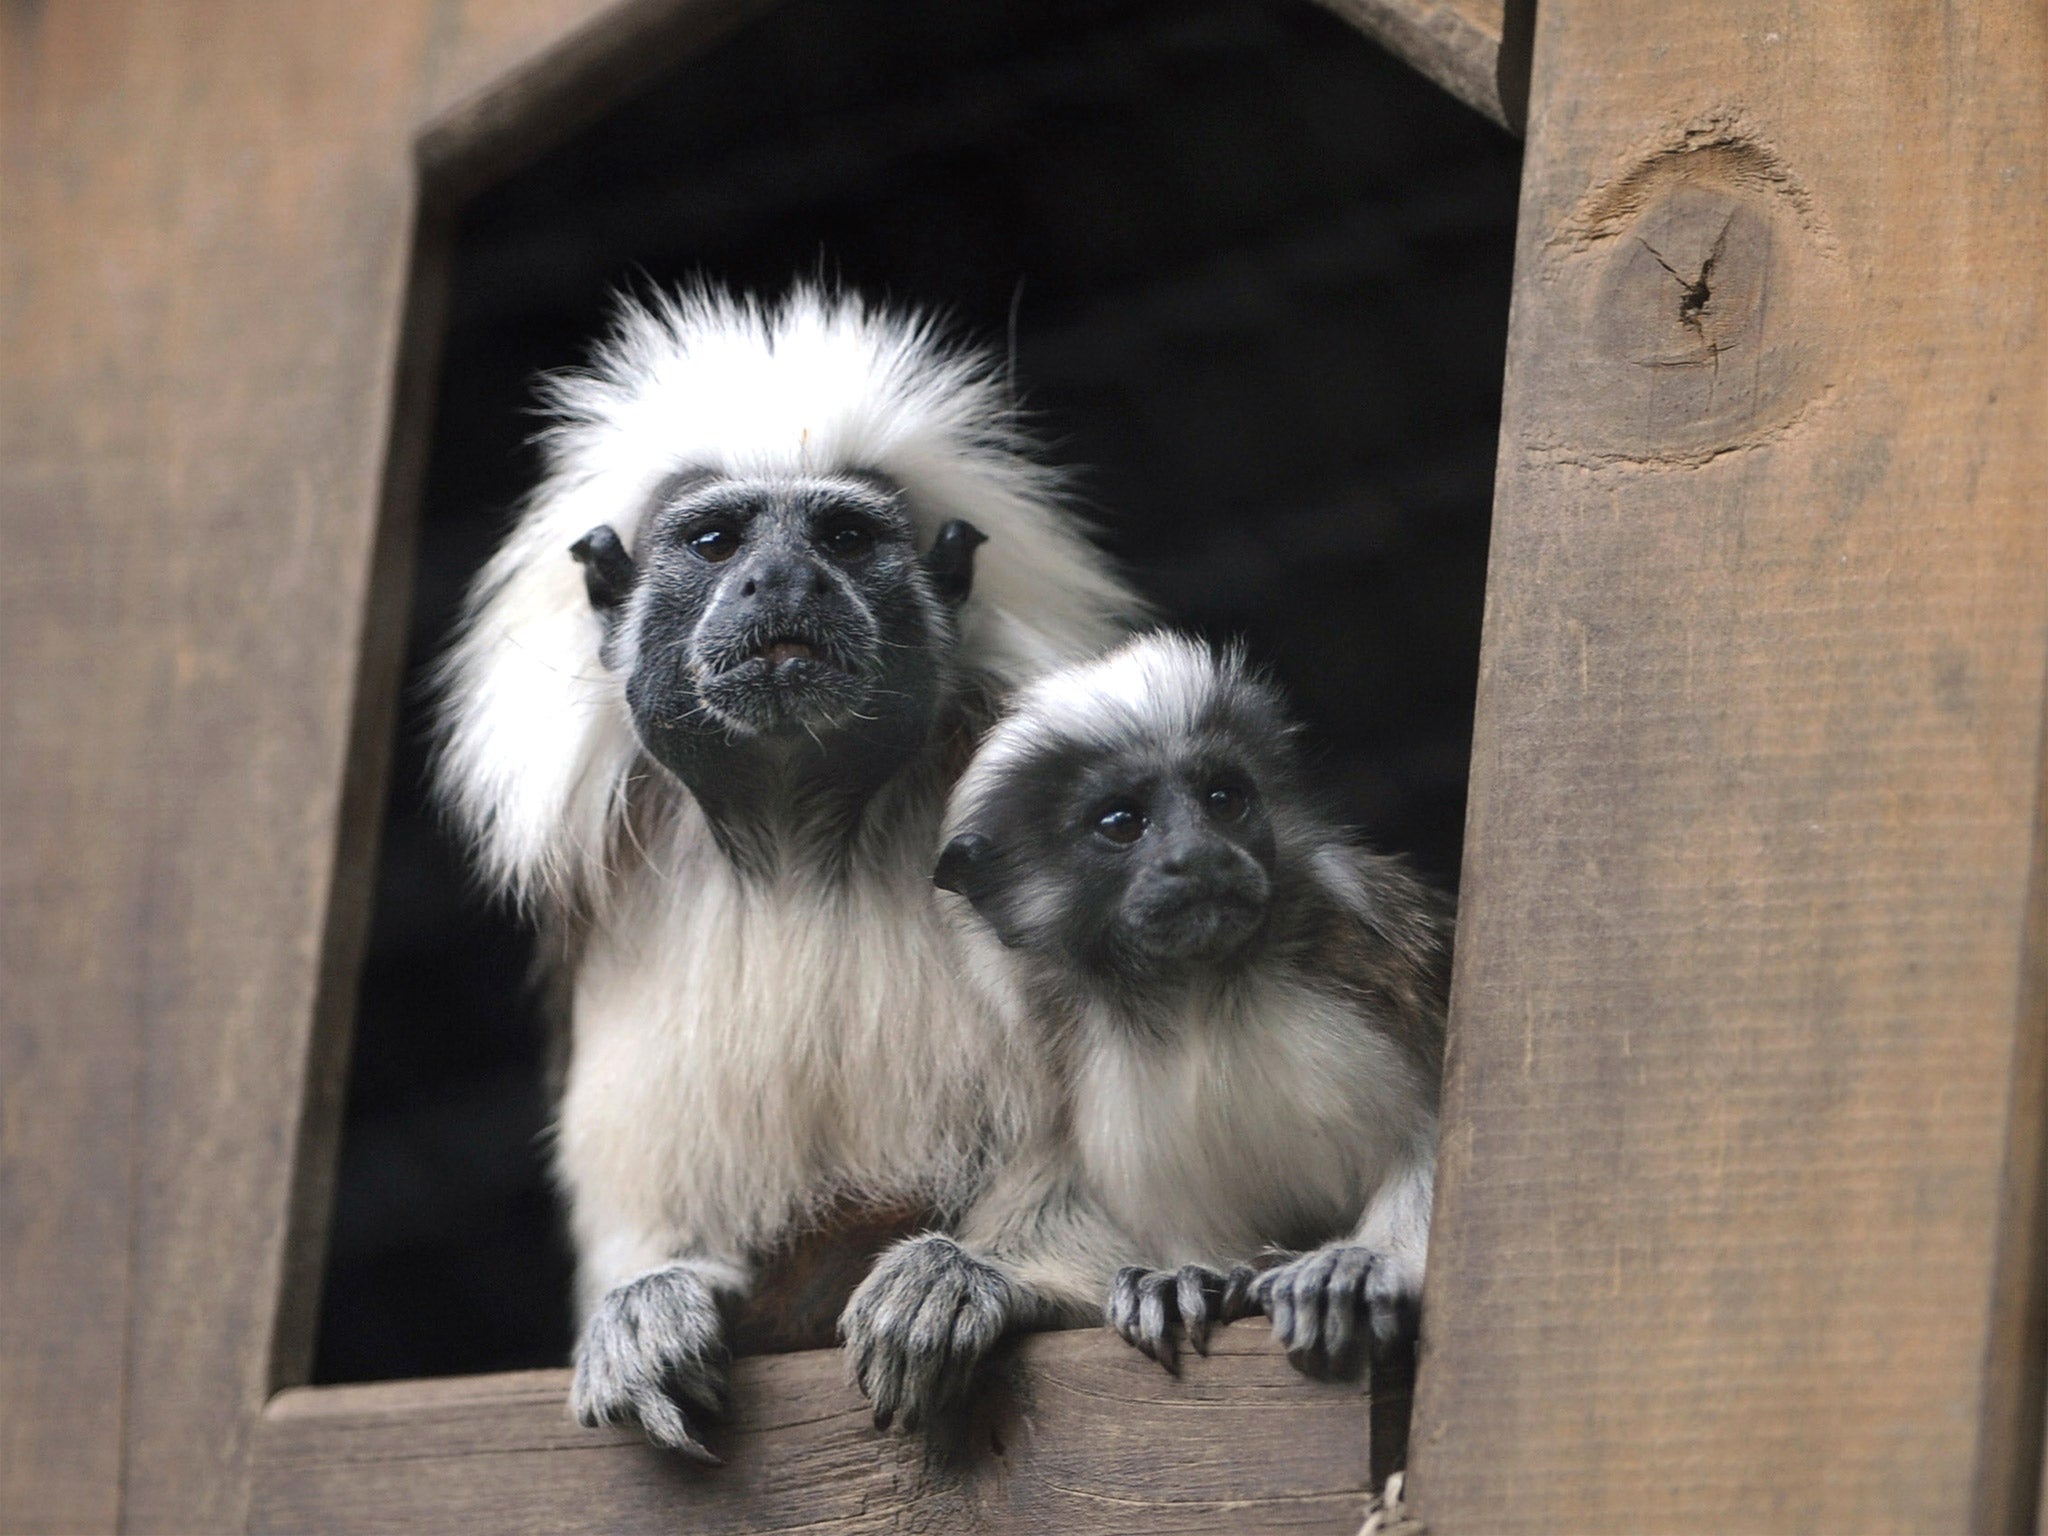 Tamarin monkeys account for 14 per cent of online ads